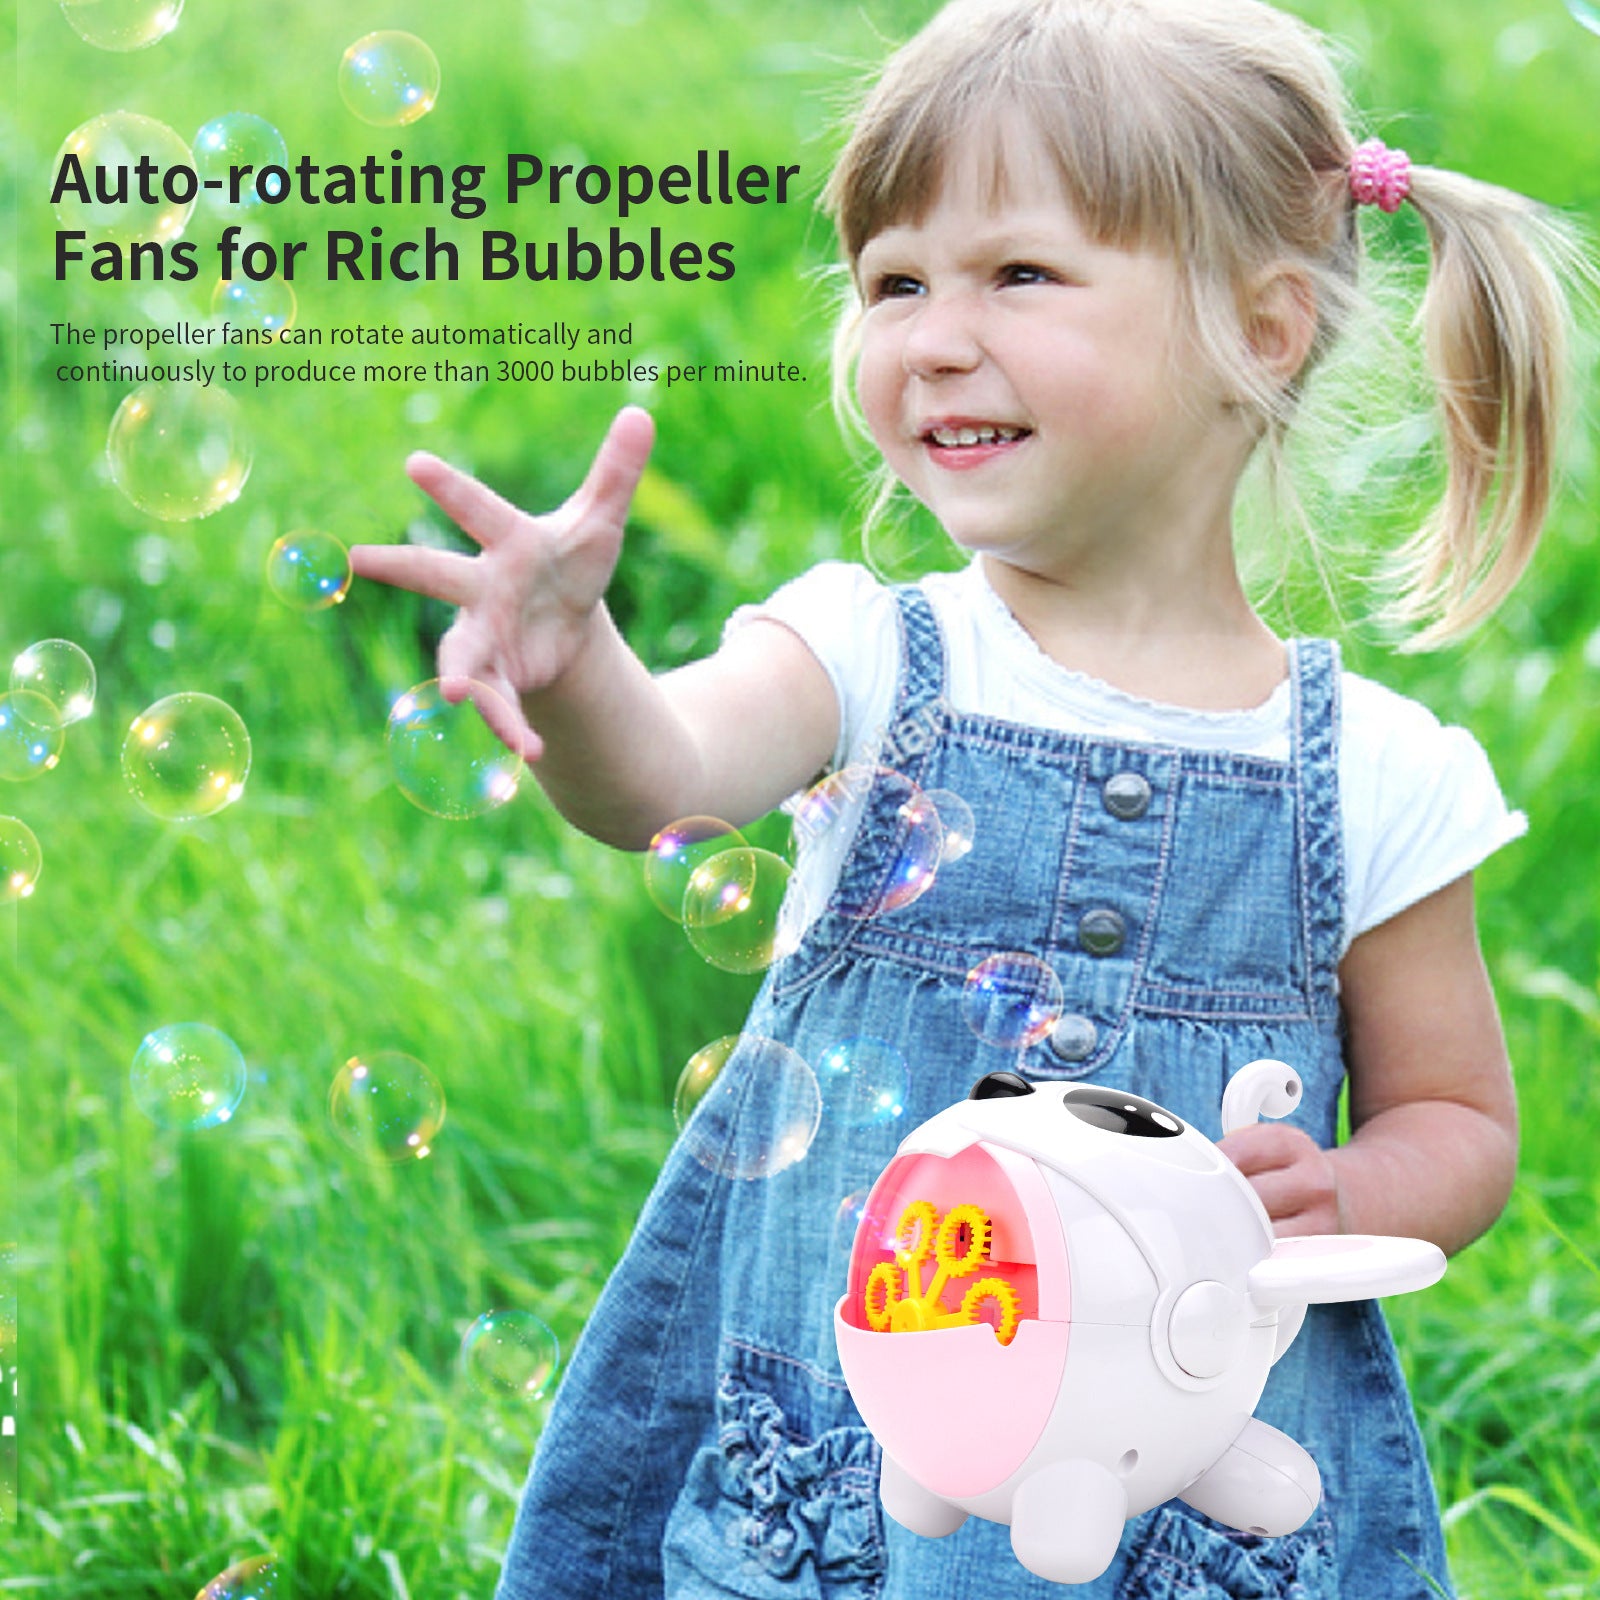 Automatic Cute Bubble Machine - Electric Bubble Blower Toy for Kids, Indoor and Outdoor Fun